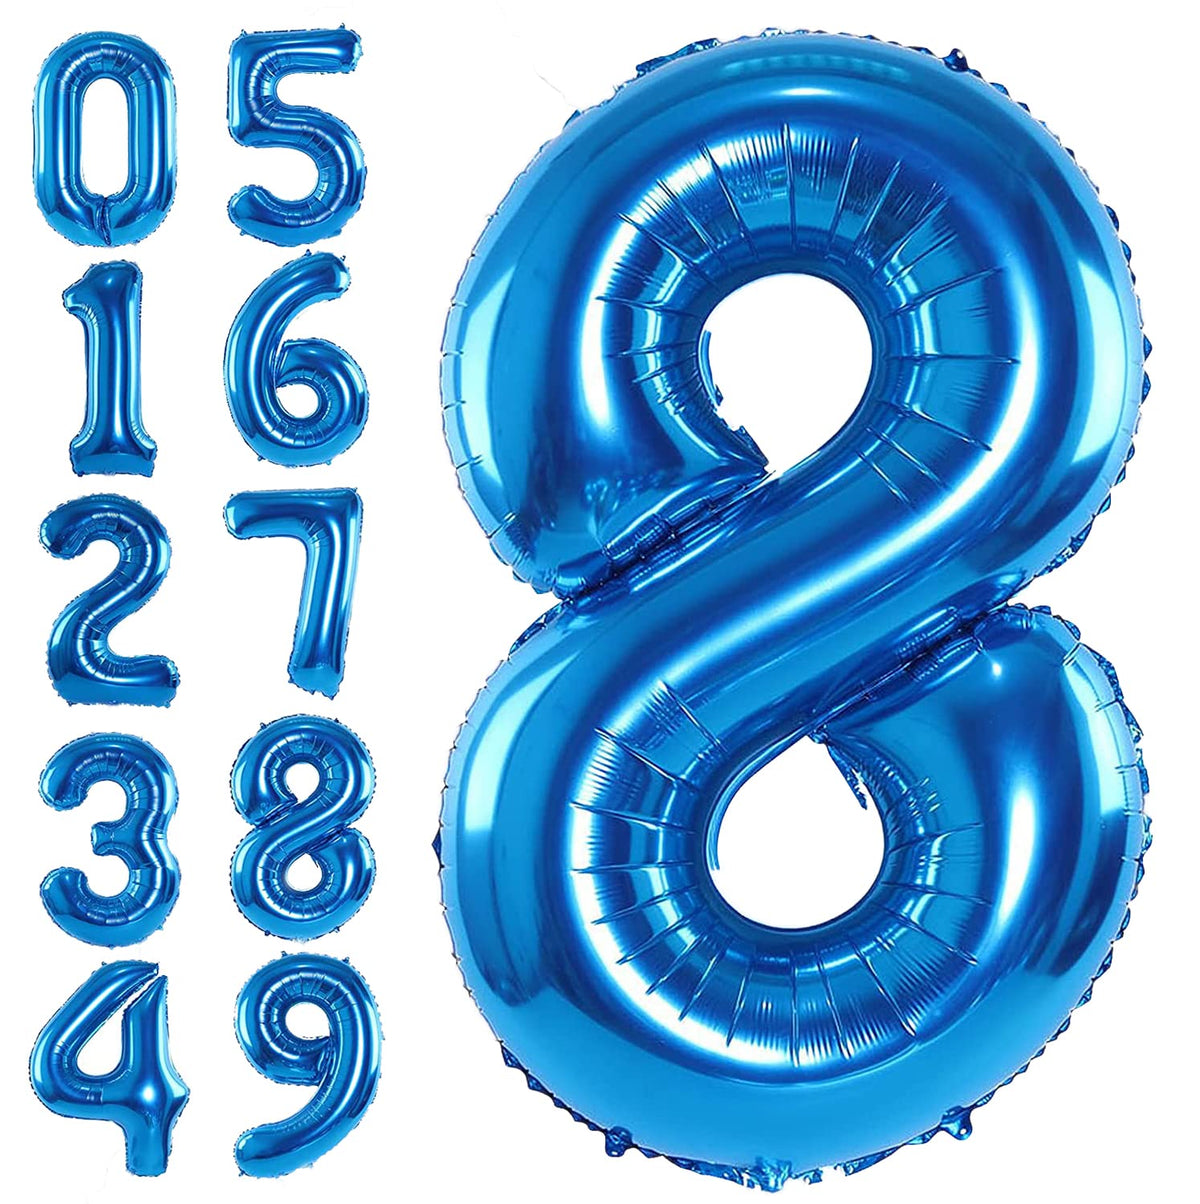 Tomario 40 Inch Large Number Balloon, Giant Foil Number Balloons for Birthday Party Decoration, Anniversaries (Blue, Number 8)